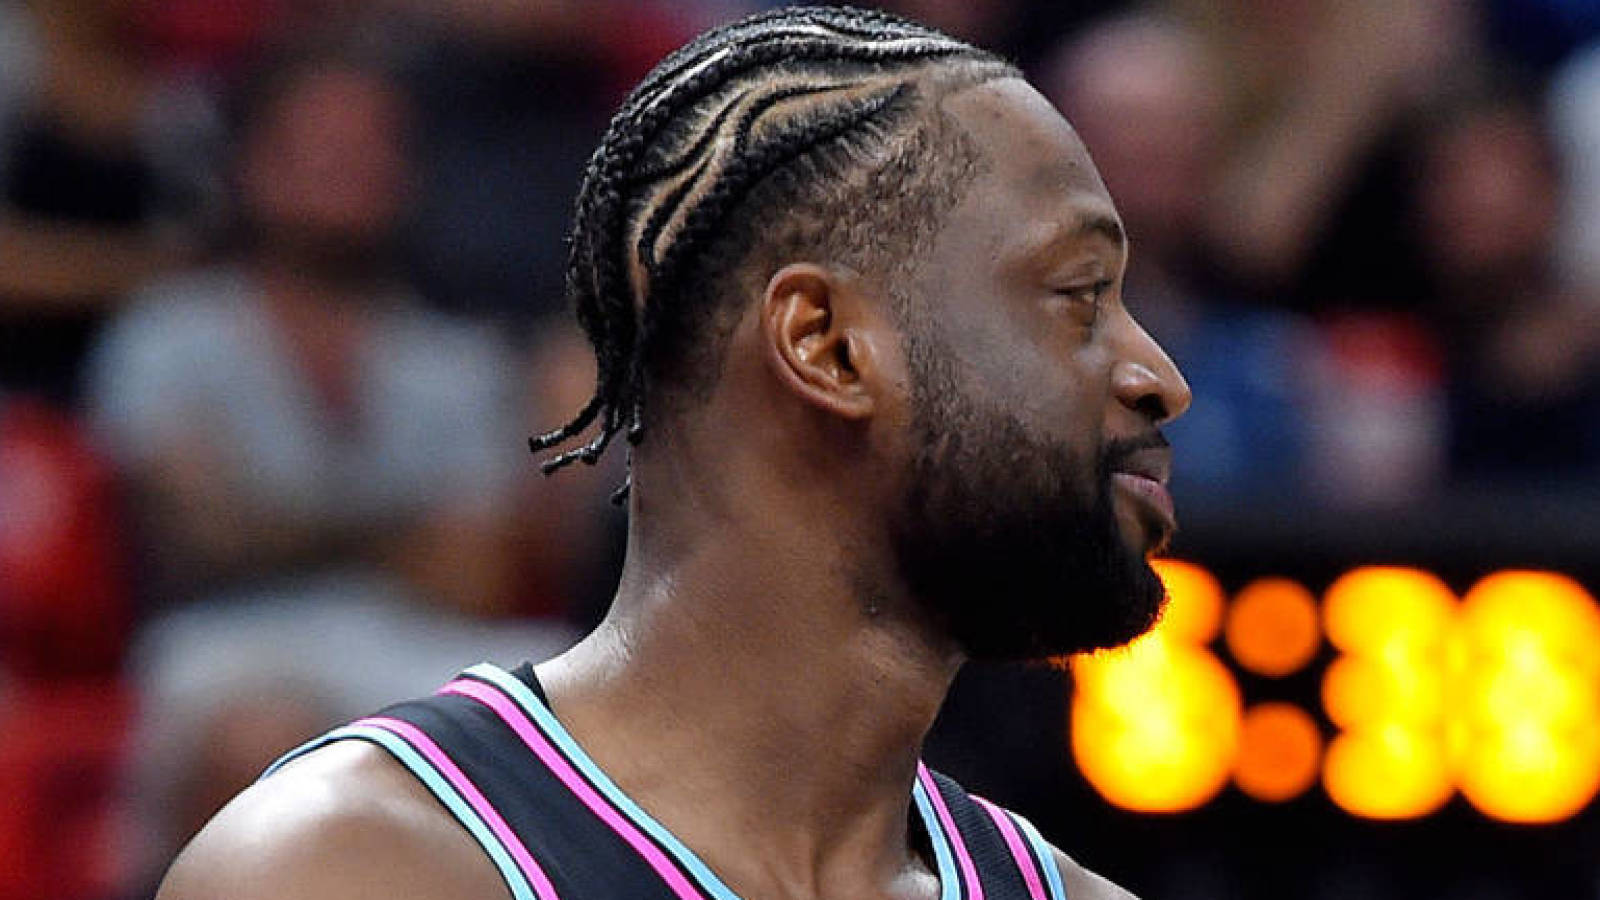 dwyane wade channeling his 'inner allen iverson' with new